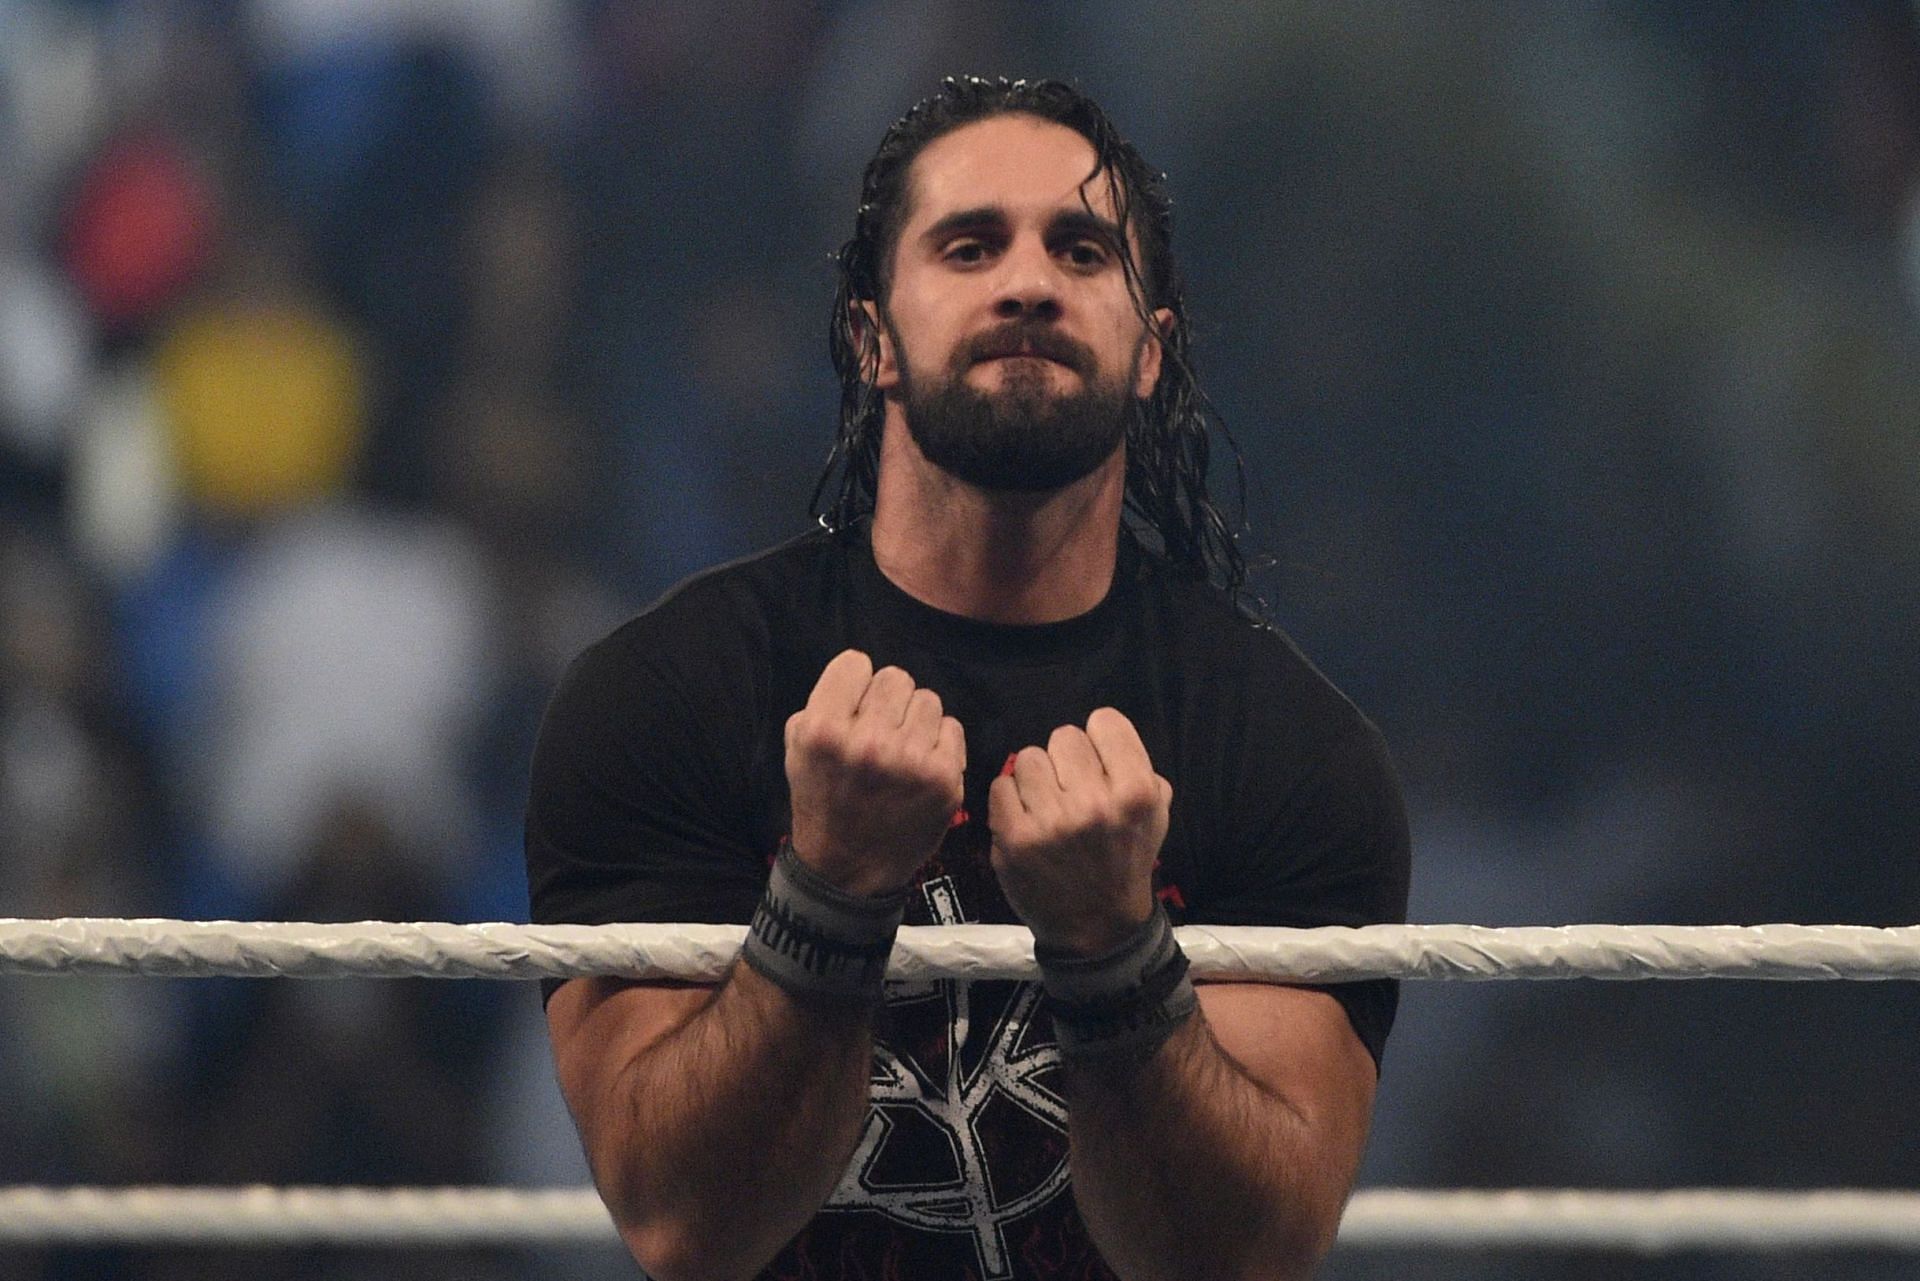 Seth Rollins has been with WWE for over a decade